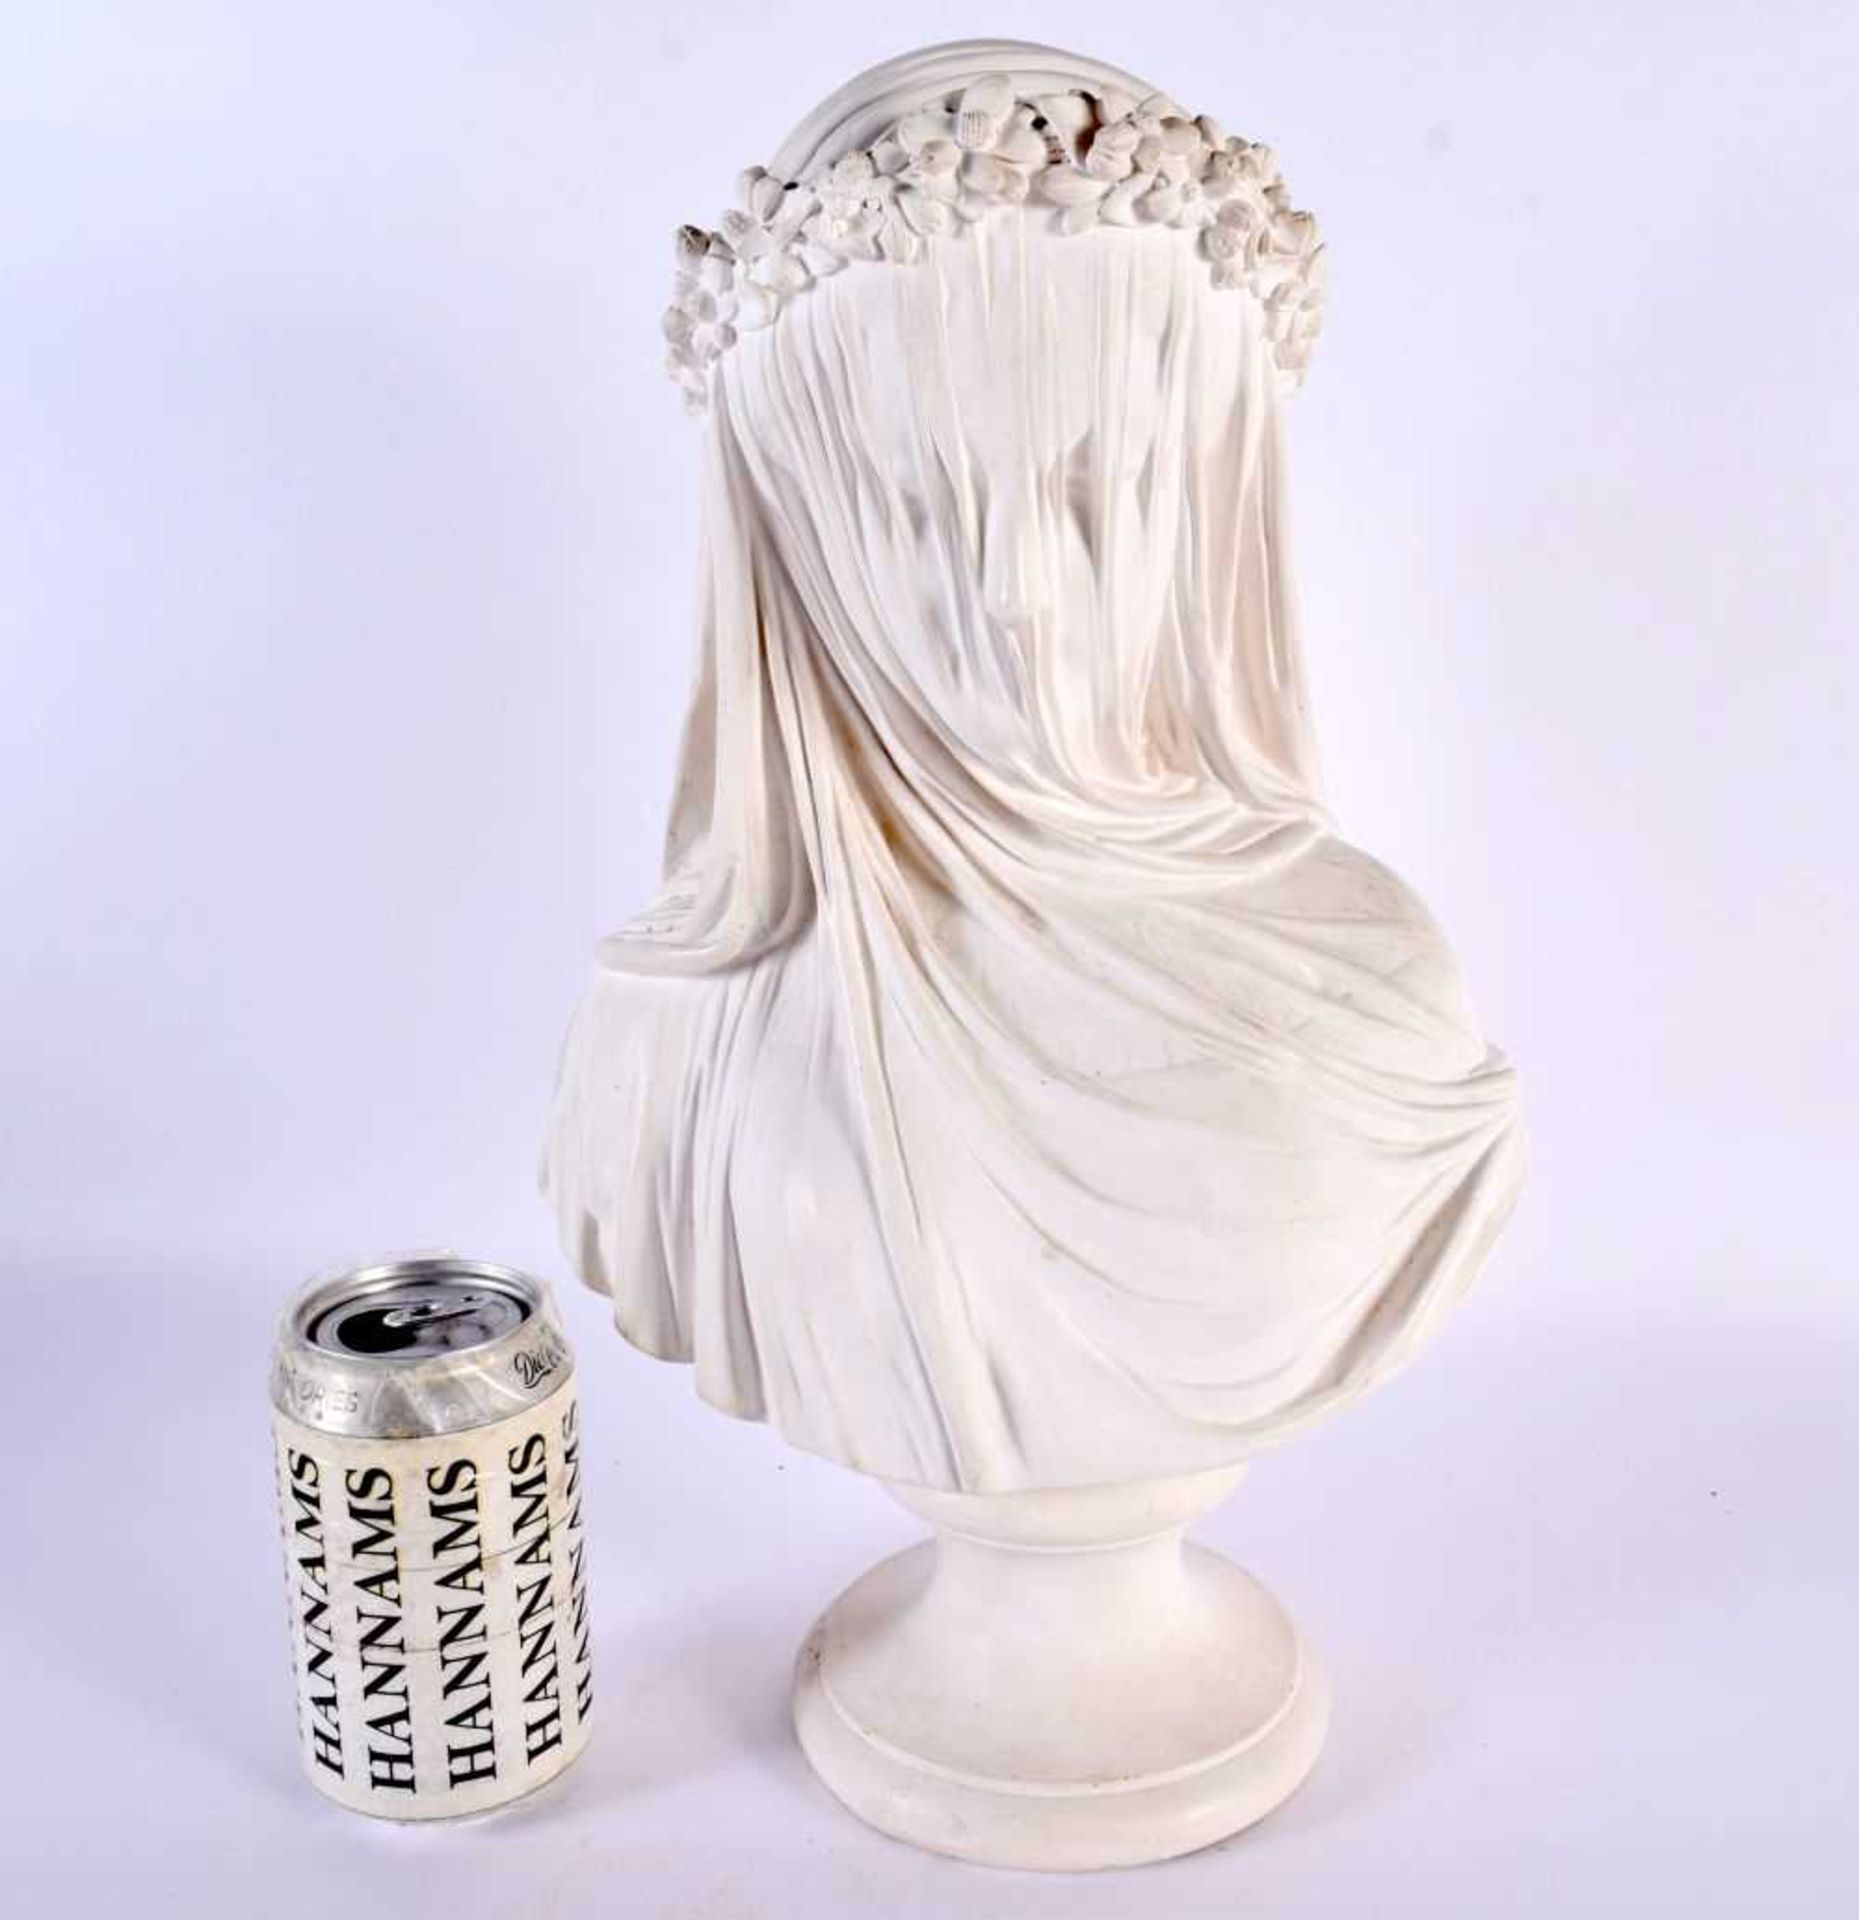 A LARGE EARLY 20TH CENTURY EUROPEAN PLASTER FIGURE OF A VEILED FEMALE modelled upon a pedestal. 38